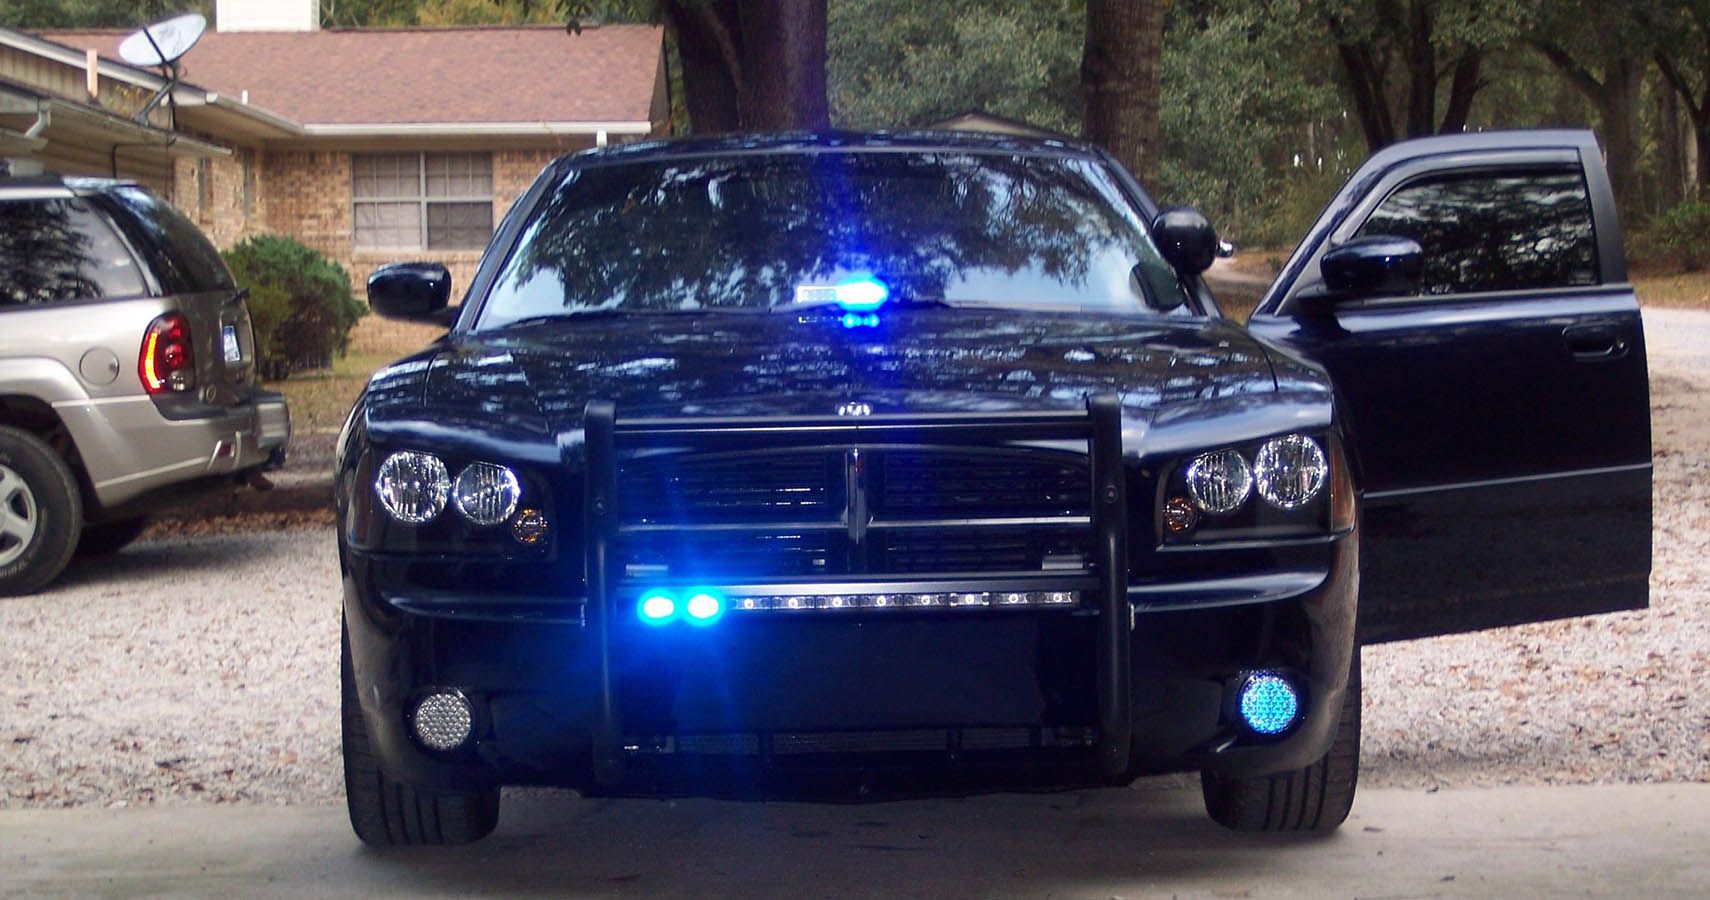 Undercover Chevy Police Cars